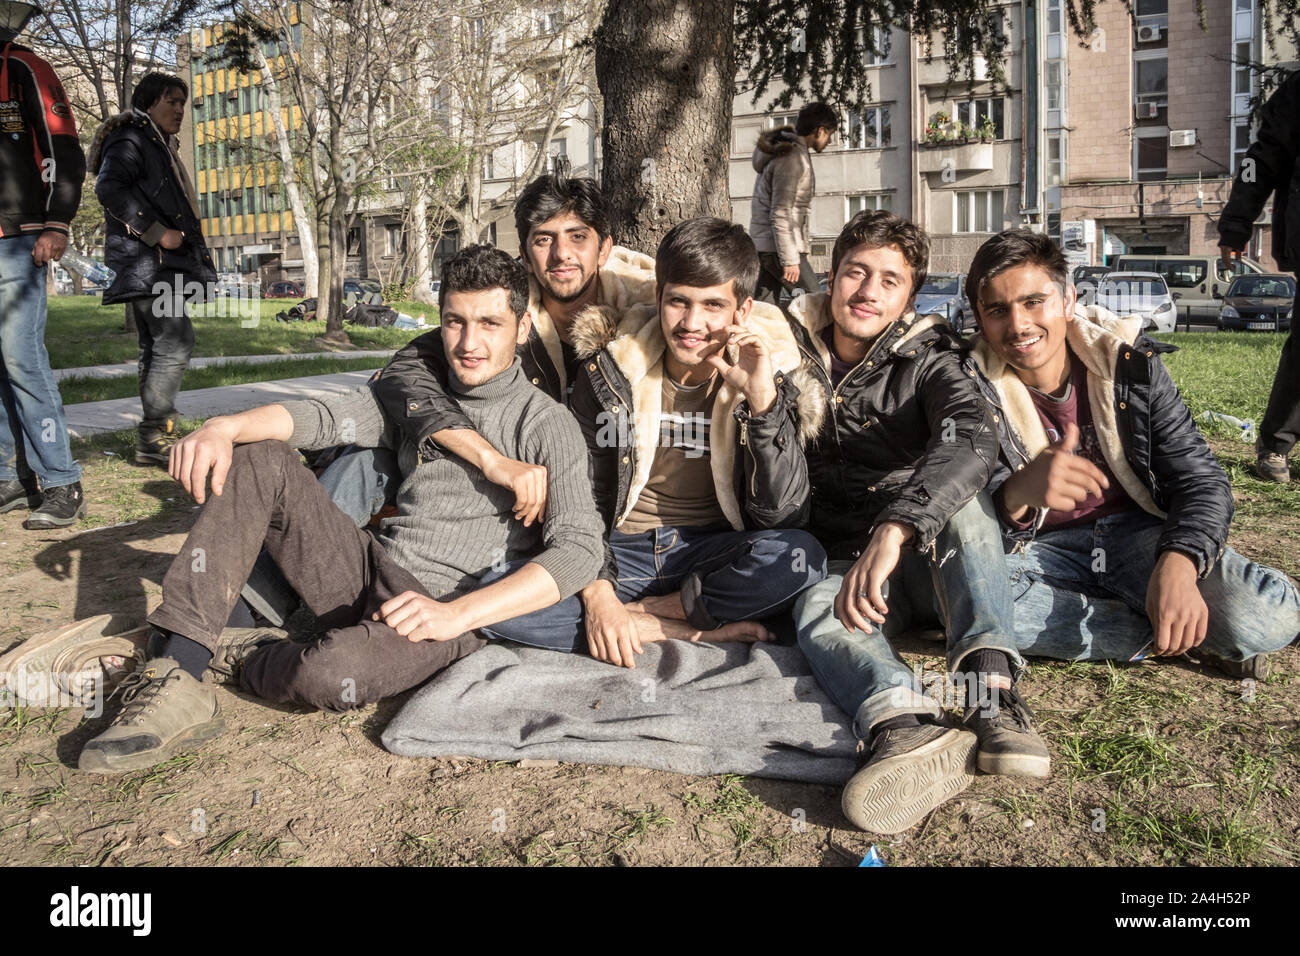 BELGRADE, SERBIA - APRIL 2, 2016: Refugees, young men from Syria and Afghanistan, sitting & posing in a Belgrade park, being in transit towards the Eu Stock Photo